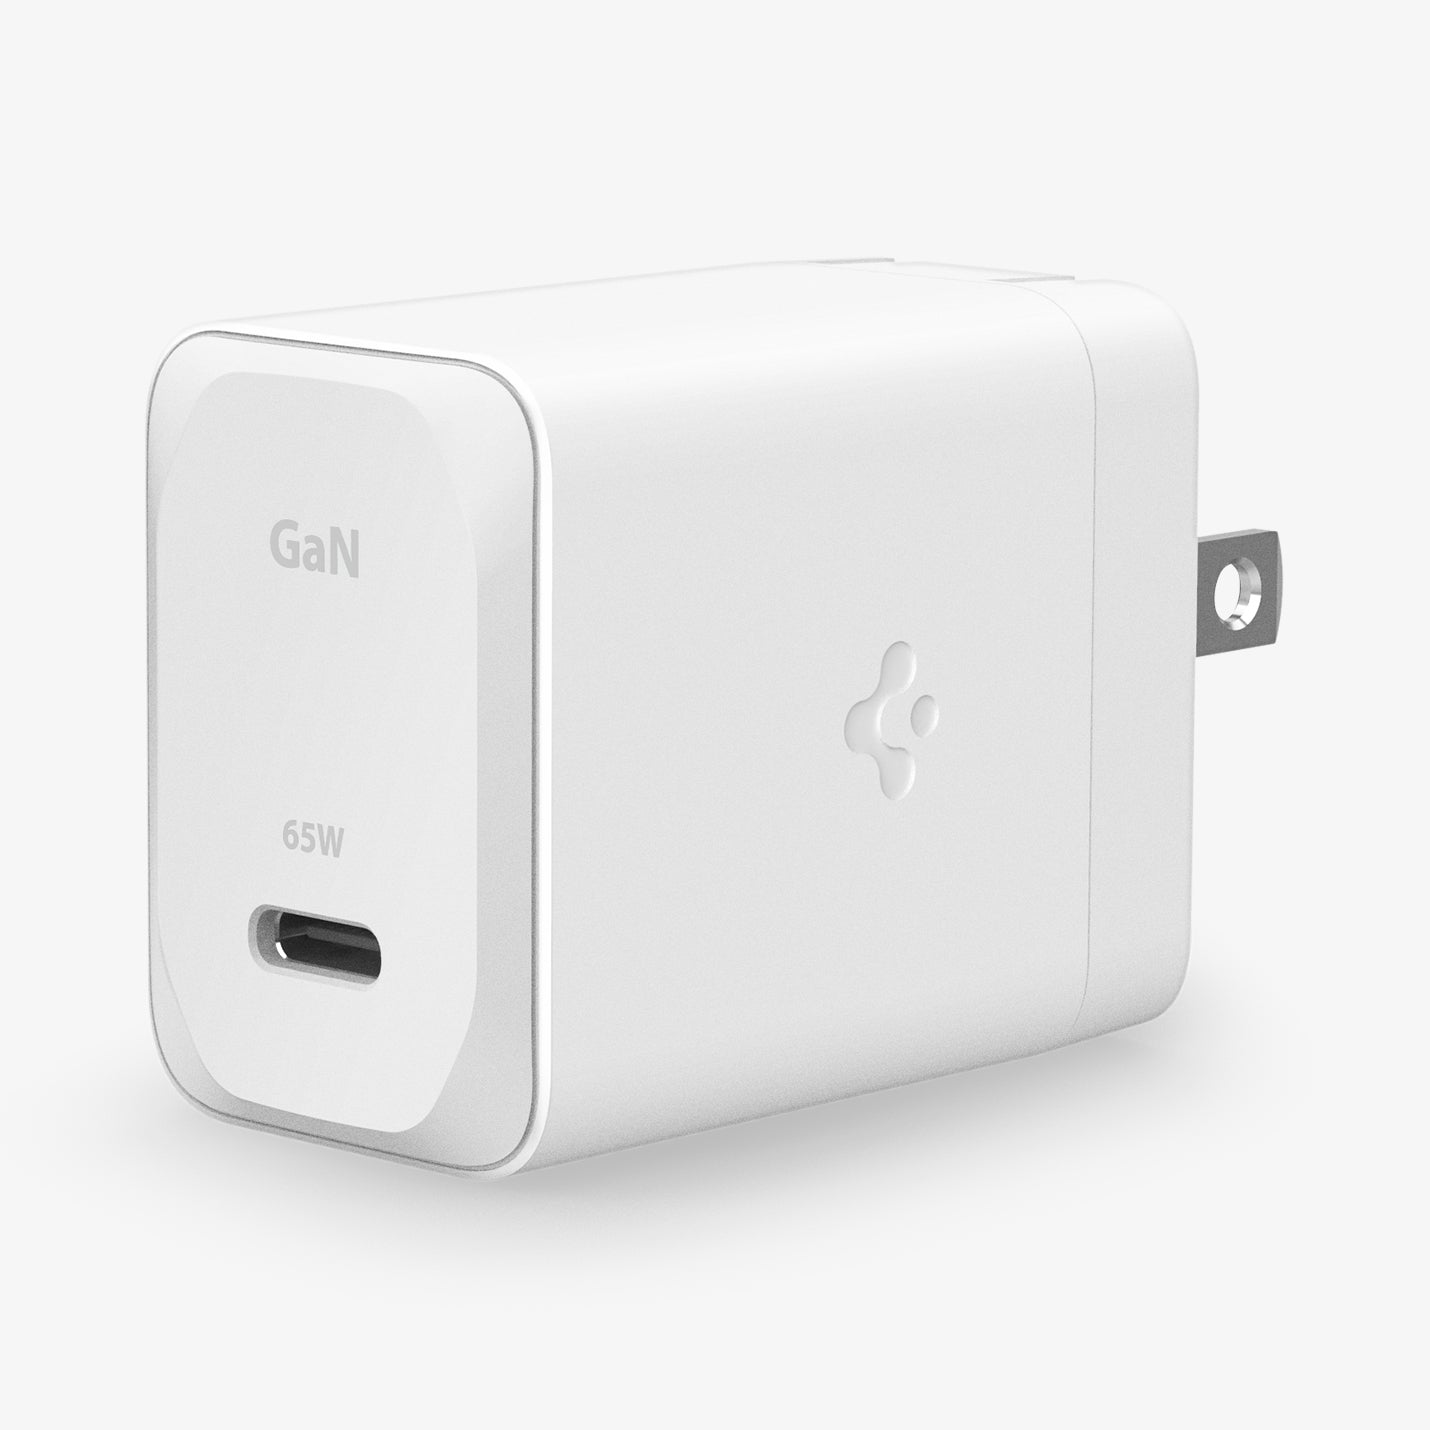 ACH05474 - ArcStation™ Pro GaN 651 Wall Charger PE2201 in White showing the top, sides and partial plug of a wall charger in 65W